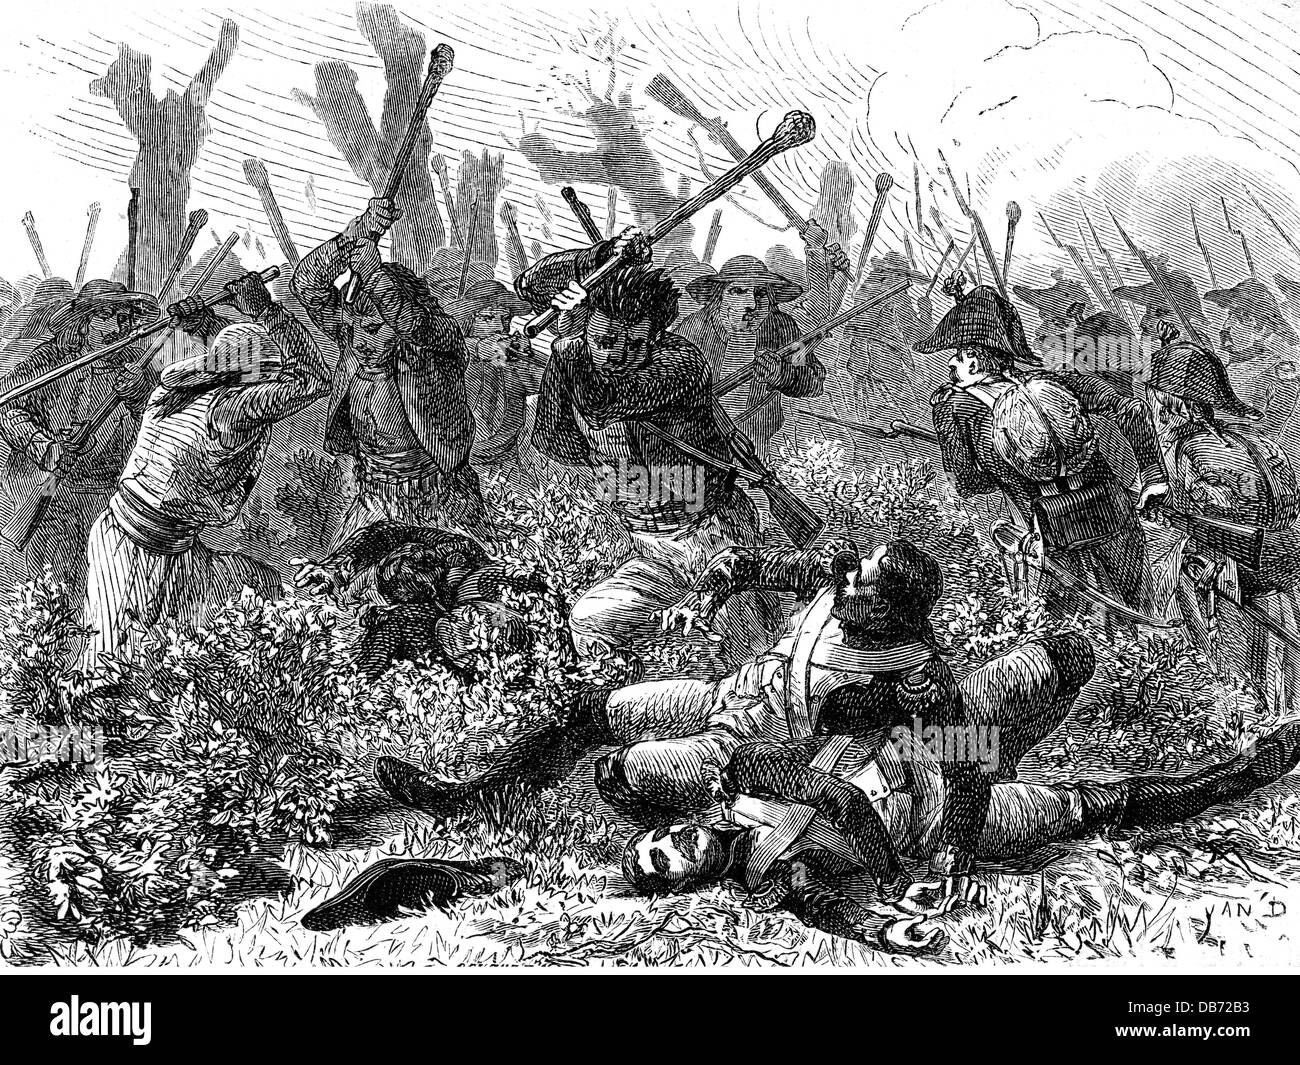 events, War in the Vendée 1793 - 1796, Battle of Cholet, 17.10.1793, fight between Republican troops and insurgents, 1793, wood engraving, 19th century, uprising, insurrection, military, Republic, royalists, Vendee, soldiers, battle, French revolution, 18th century, historic, historical, people, Additional-Rights-Clearences-Not Available Stock Photo